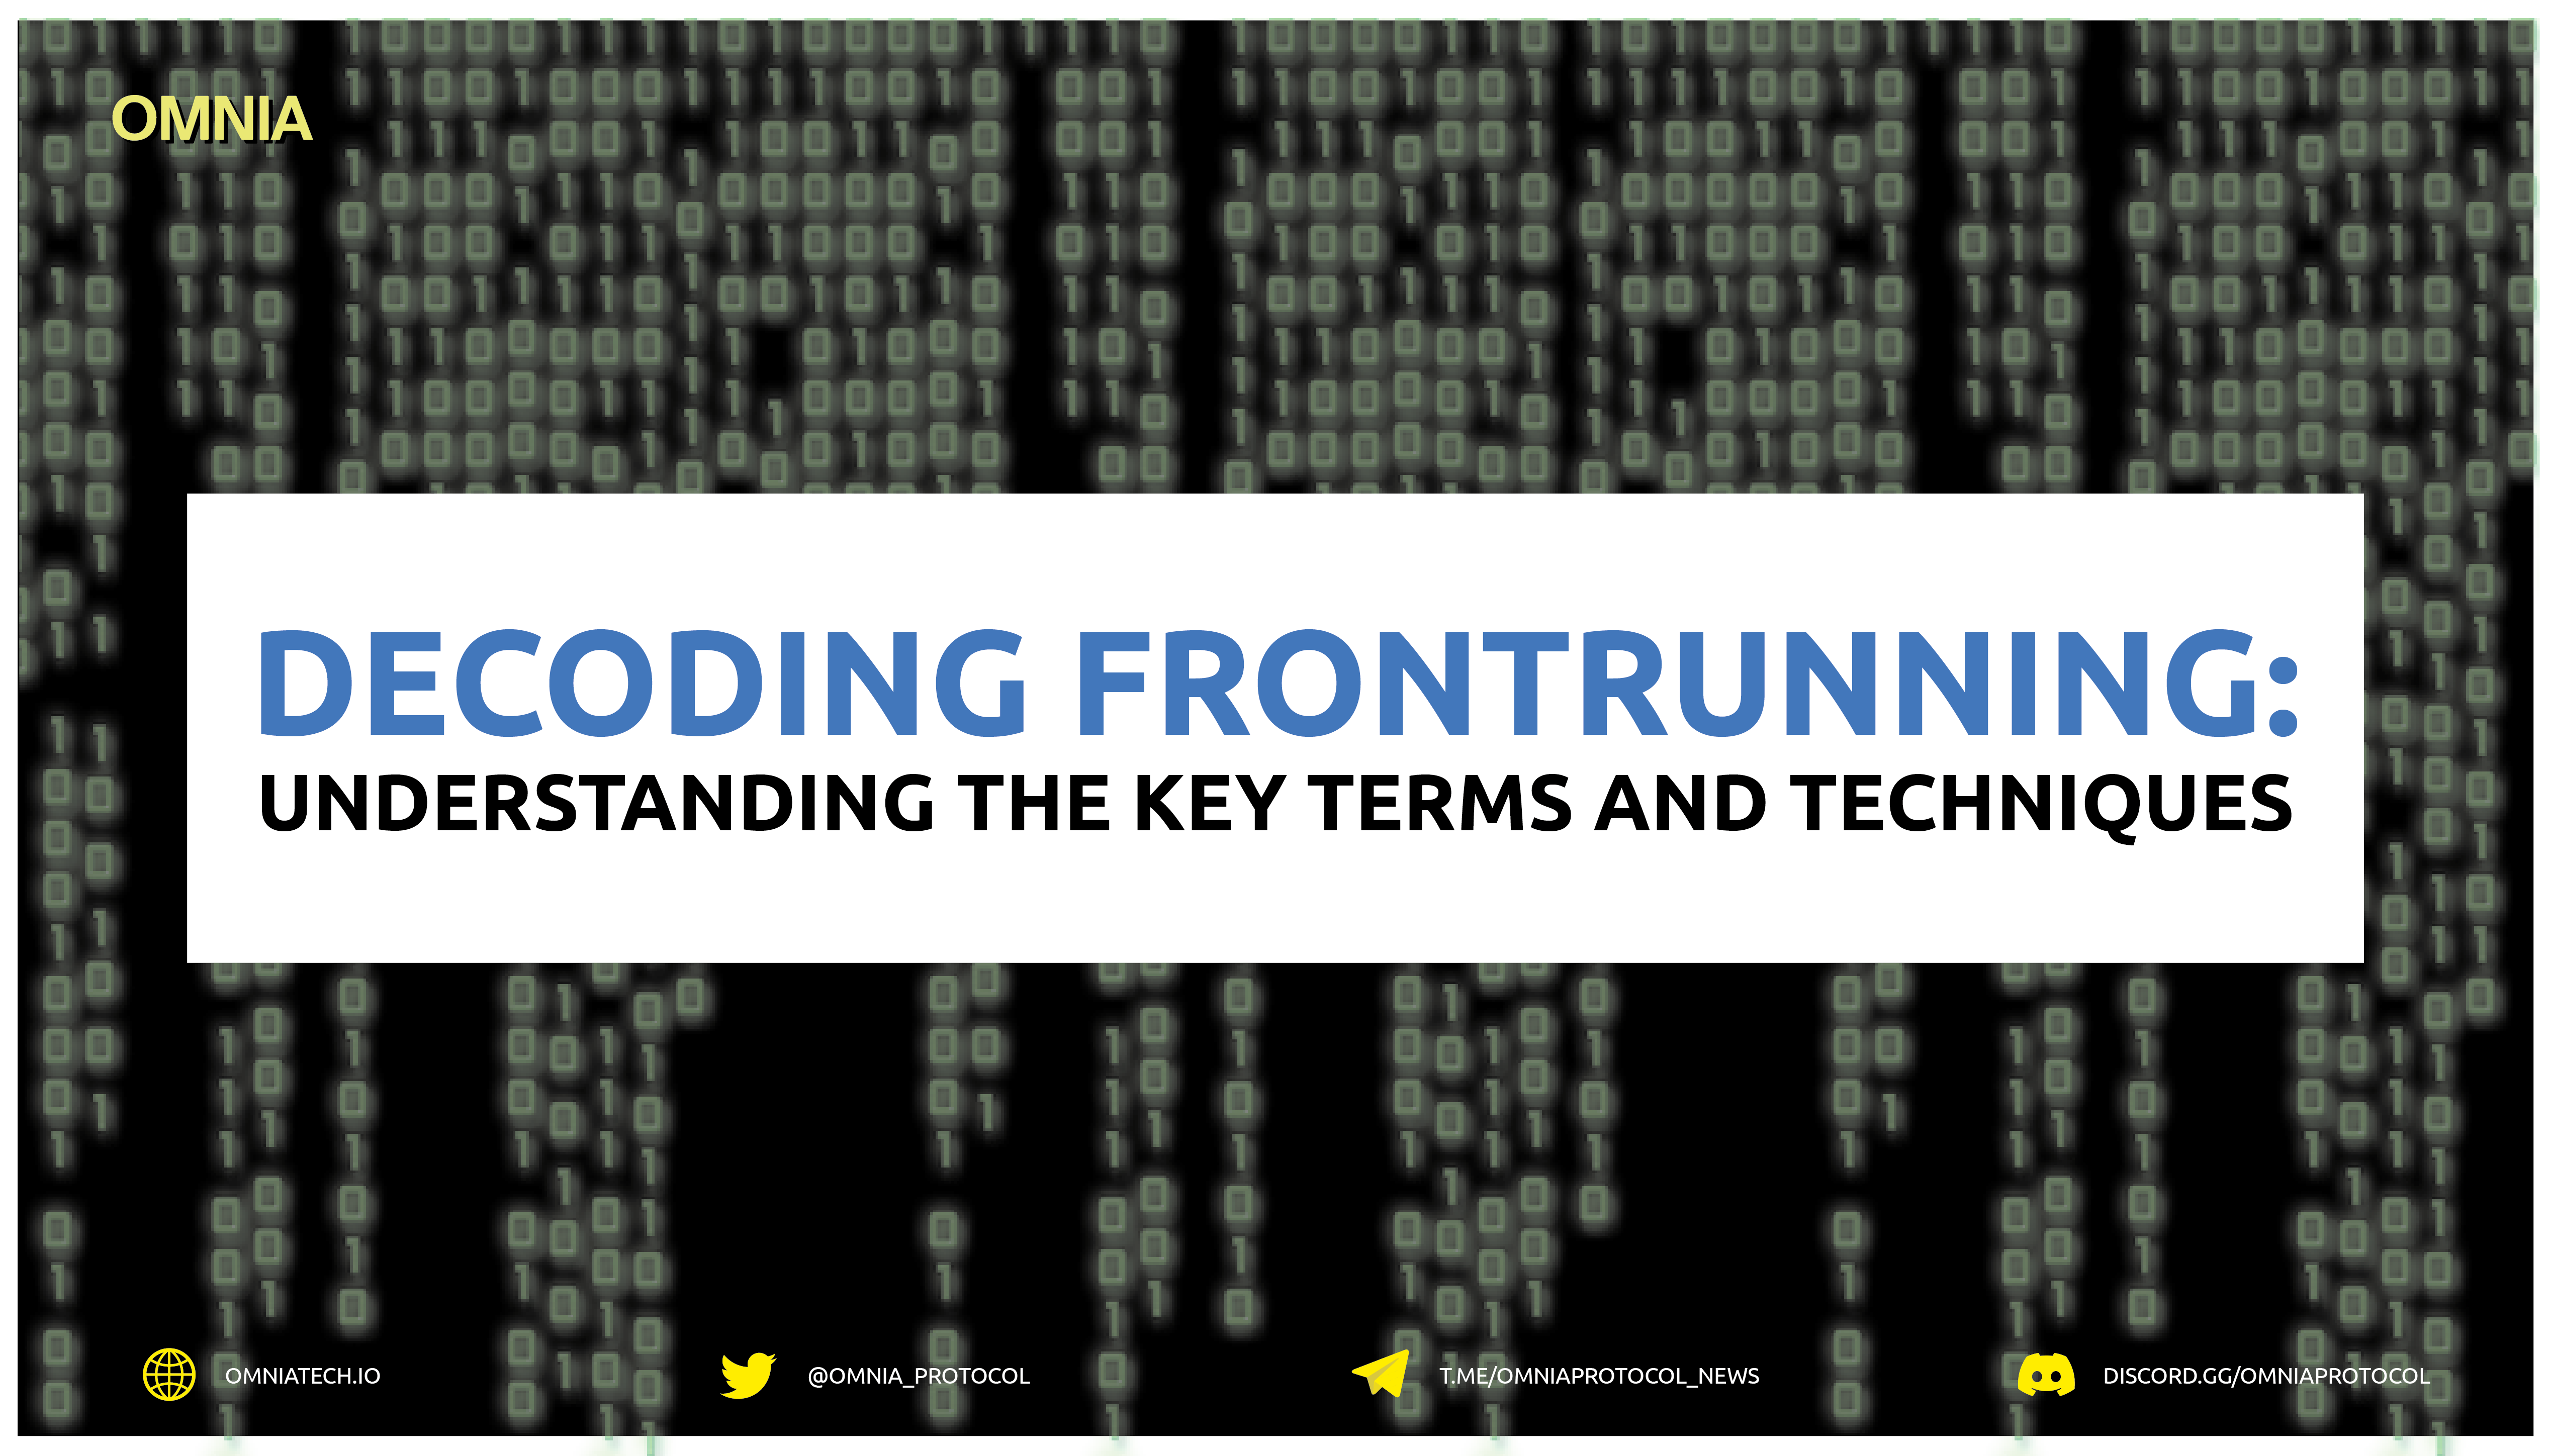 Decoding Frontrunning: Understanding the Key Terms and Techniques